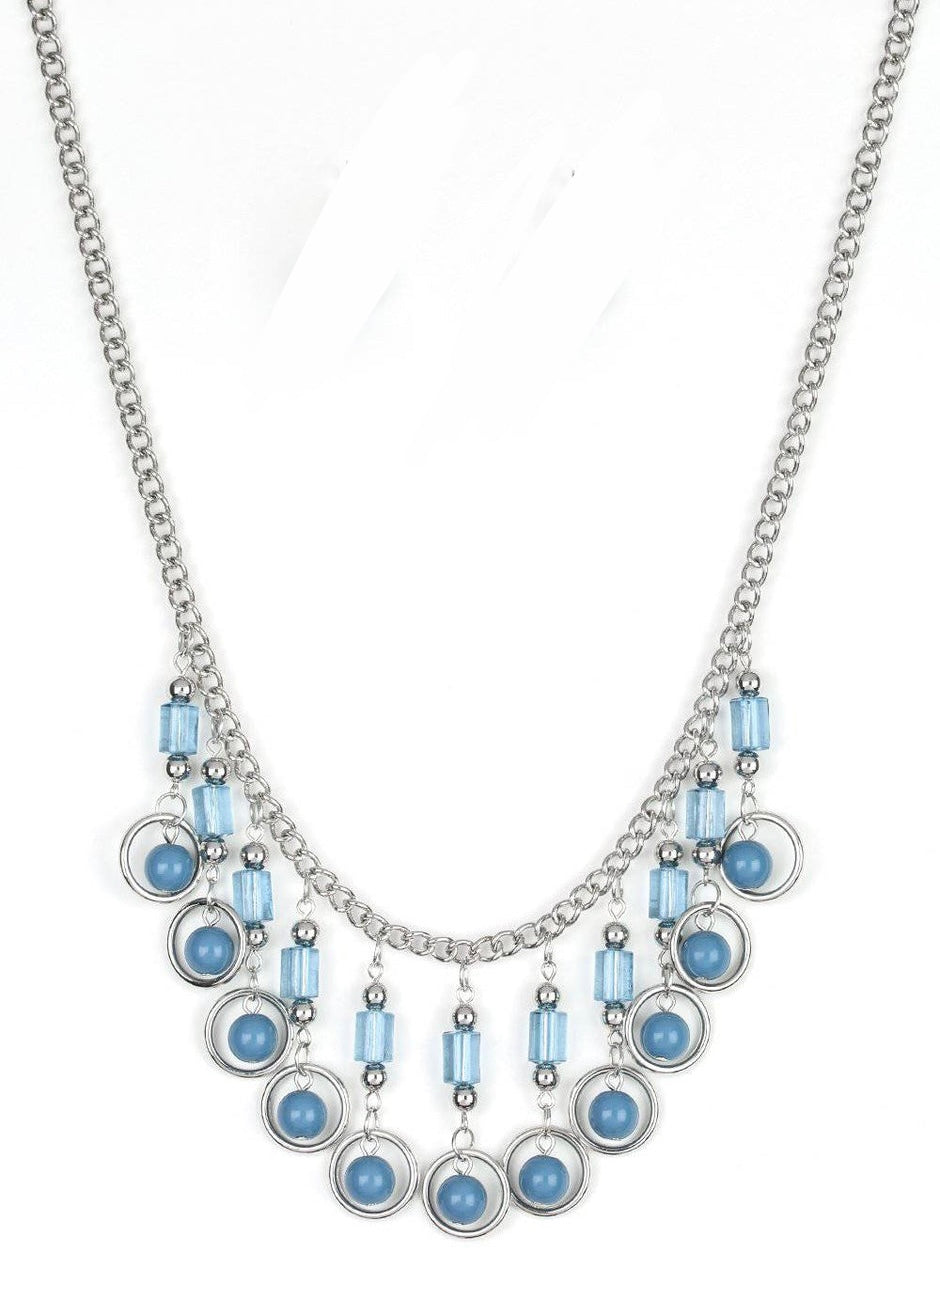 Blue Bead Charms Chain Necklace